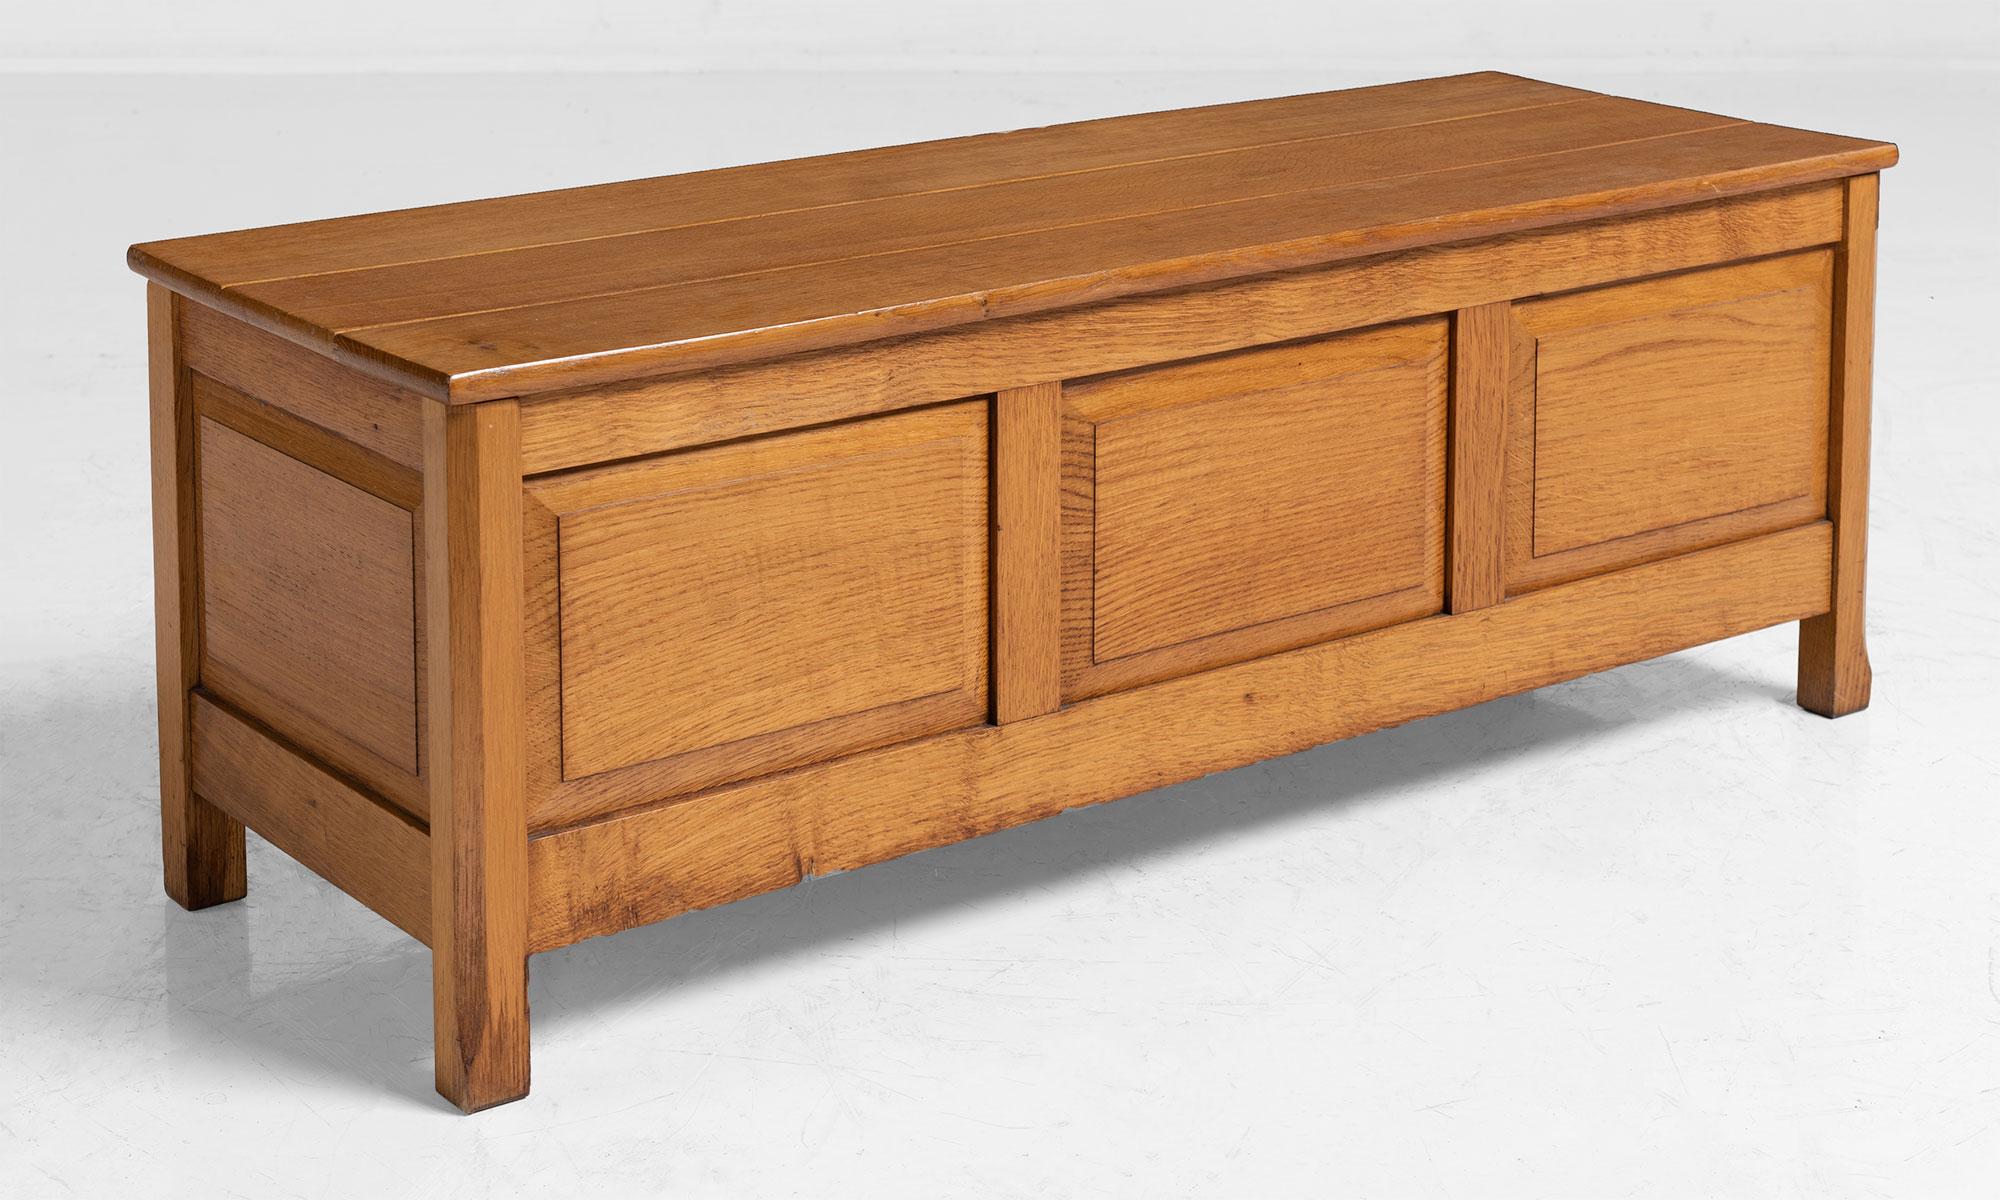 Oak blanket box made by Arthur Reynolds in the Cotswold Style for Heals of London. Paneled front and sides in original finish.
  